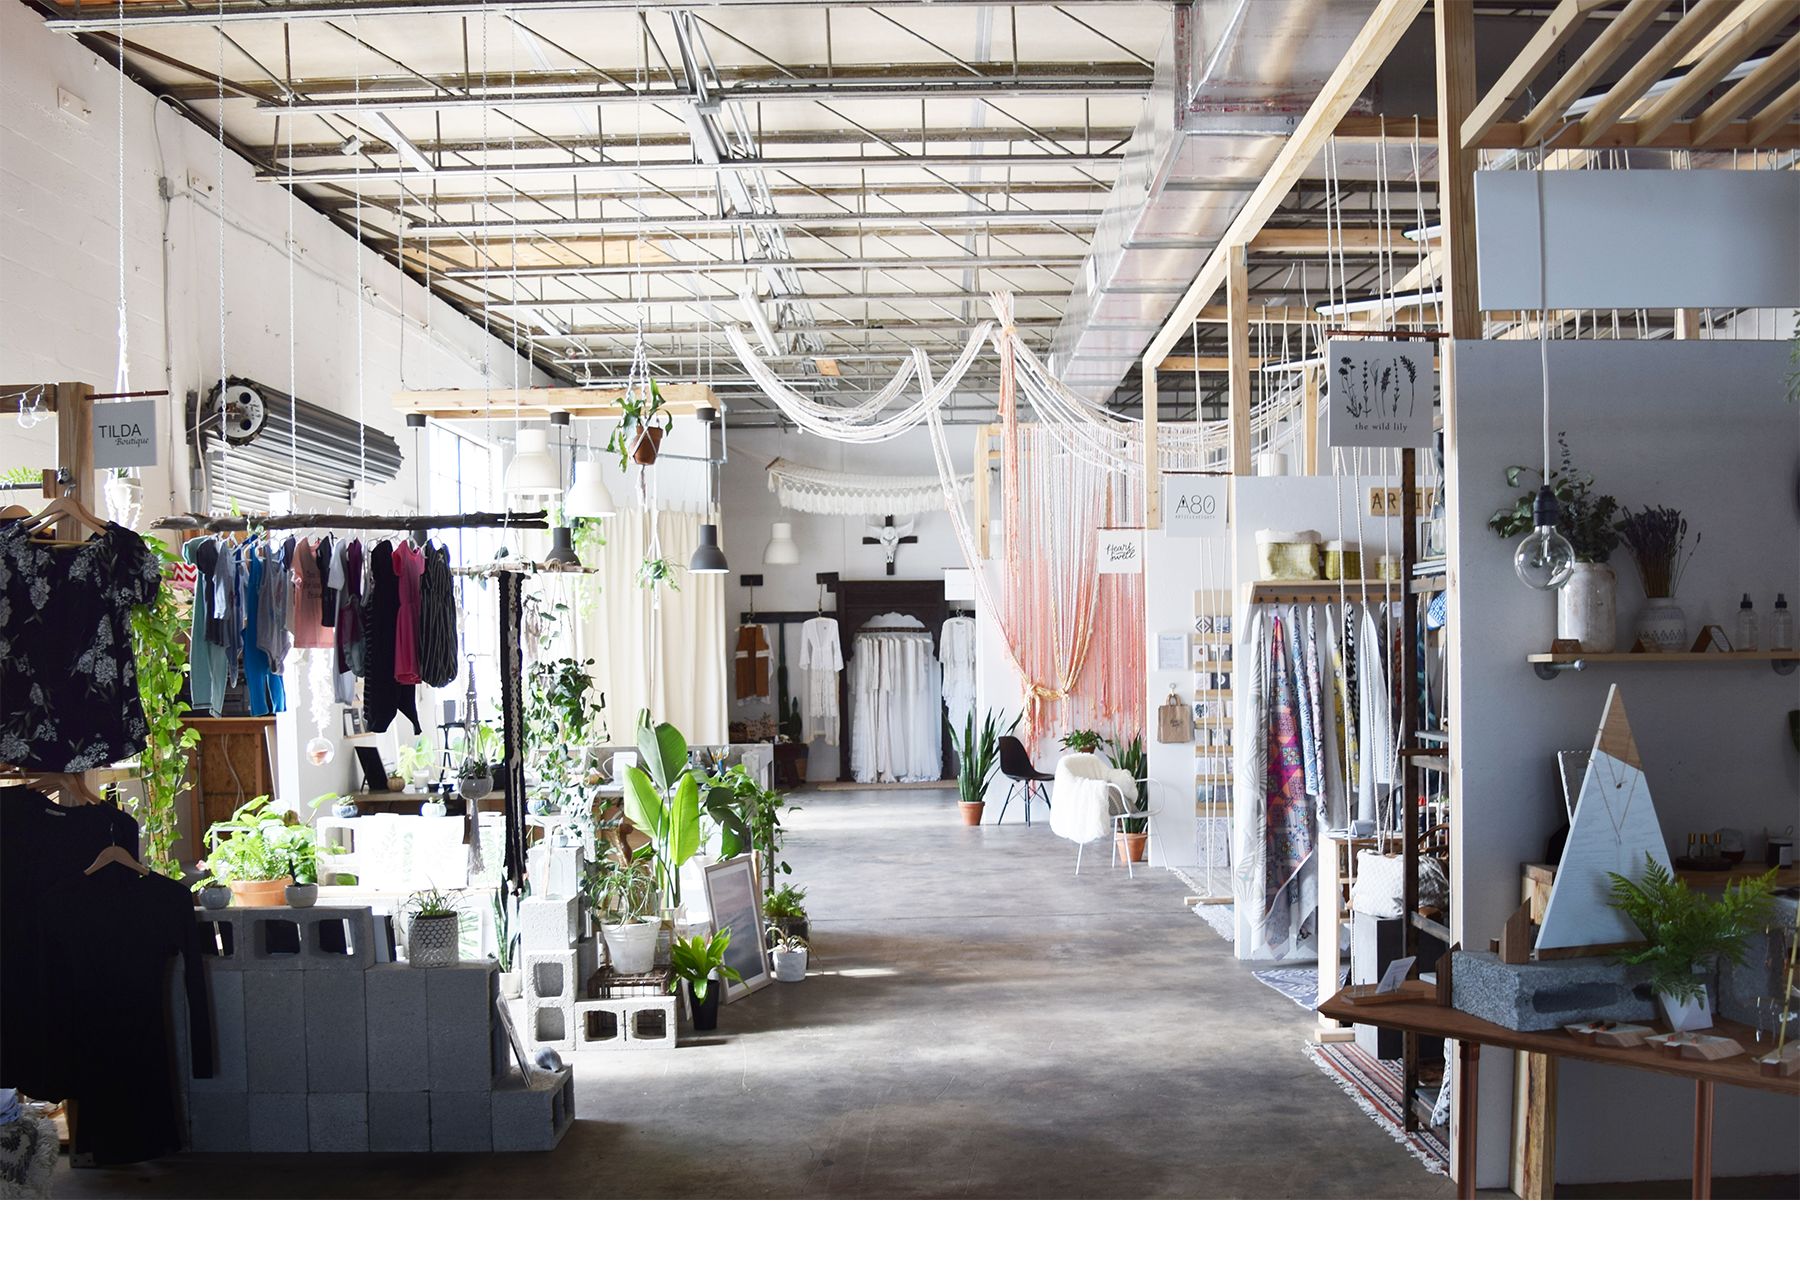 Elizabeth Ave Station's retail location in The Warehouse District of West Palm Beach, Florida featuring vendors products, an installation by Hayley Sheldon, and lush plants in an industrial vibe.